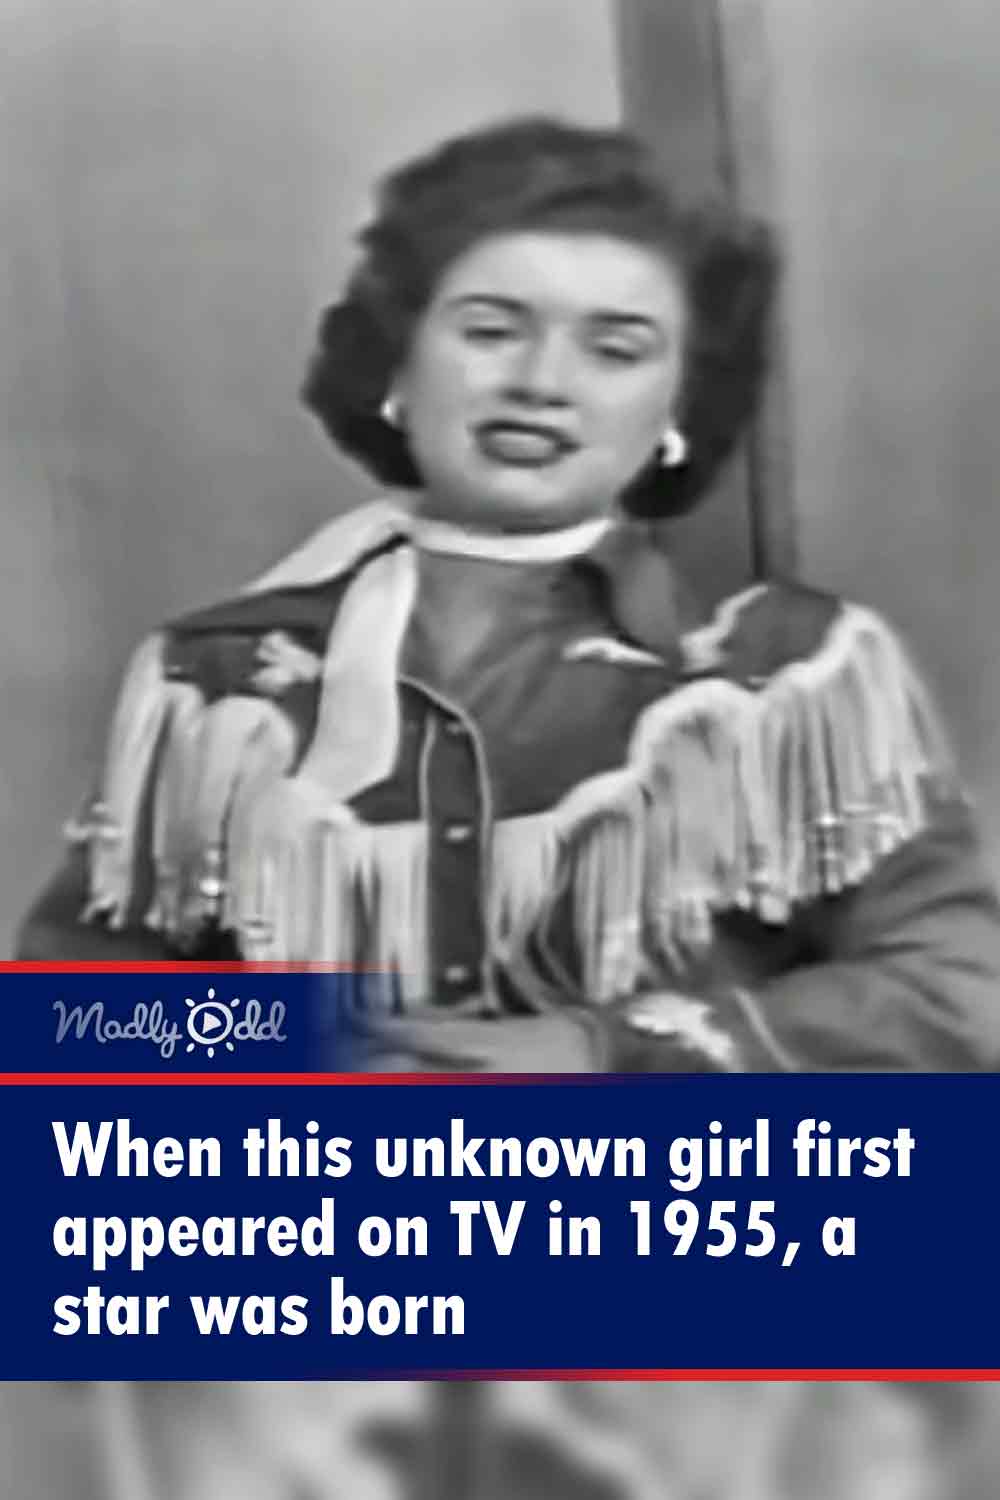 When this unknown girl first appeared on TV in 1955, a star was born